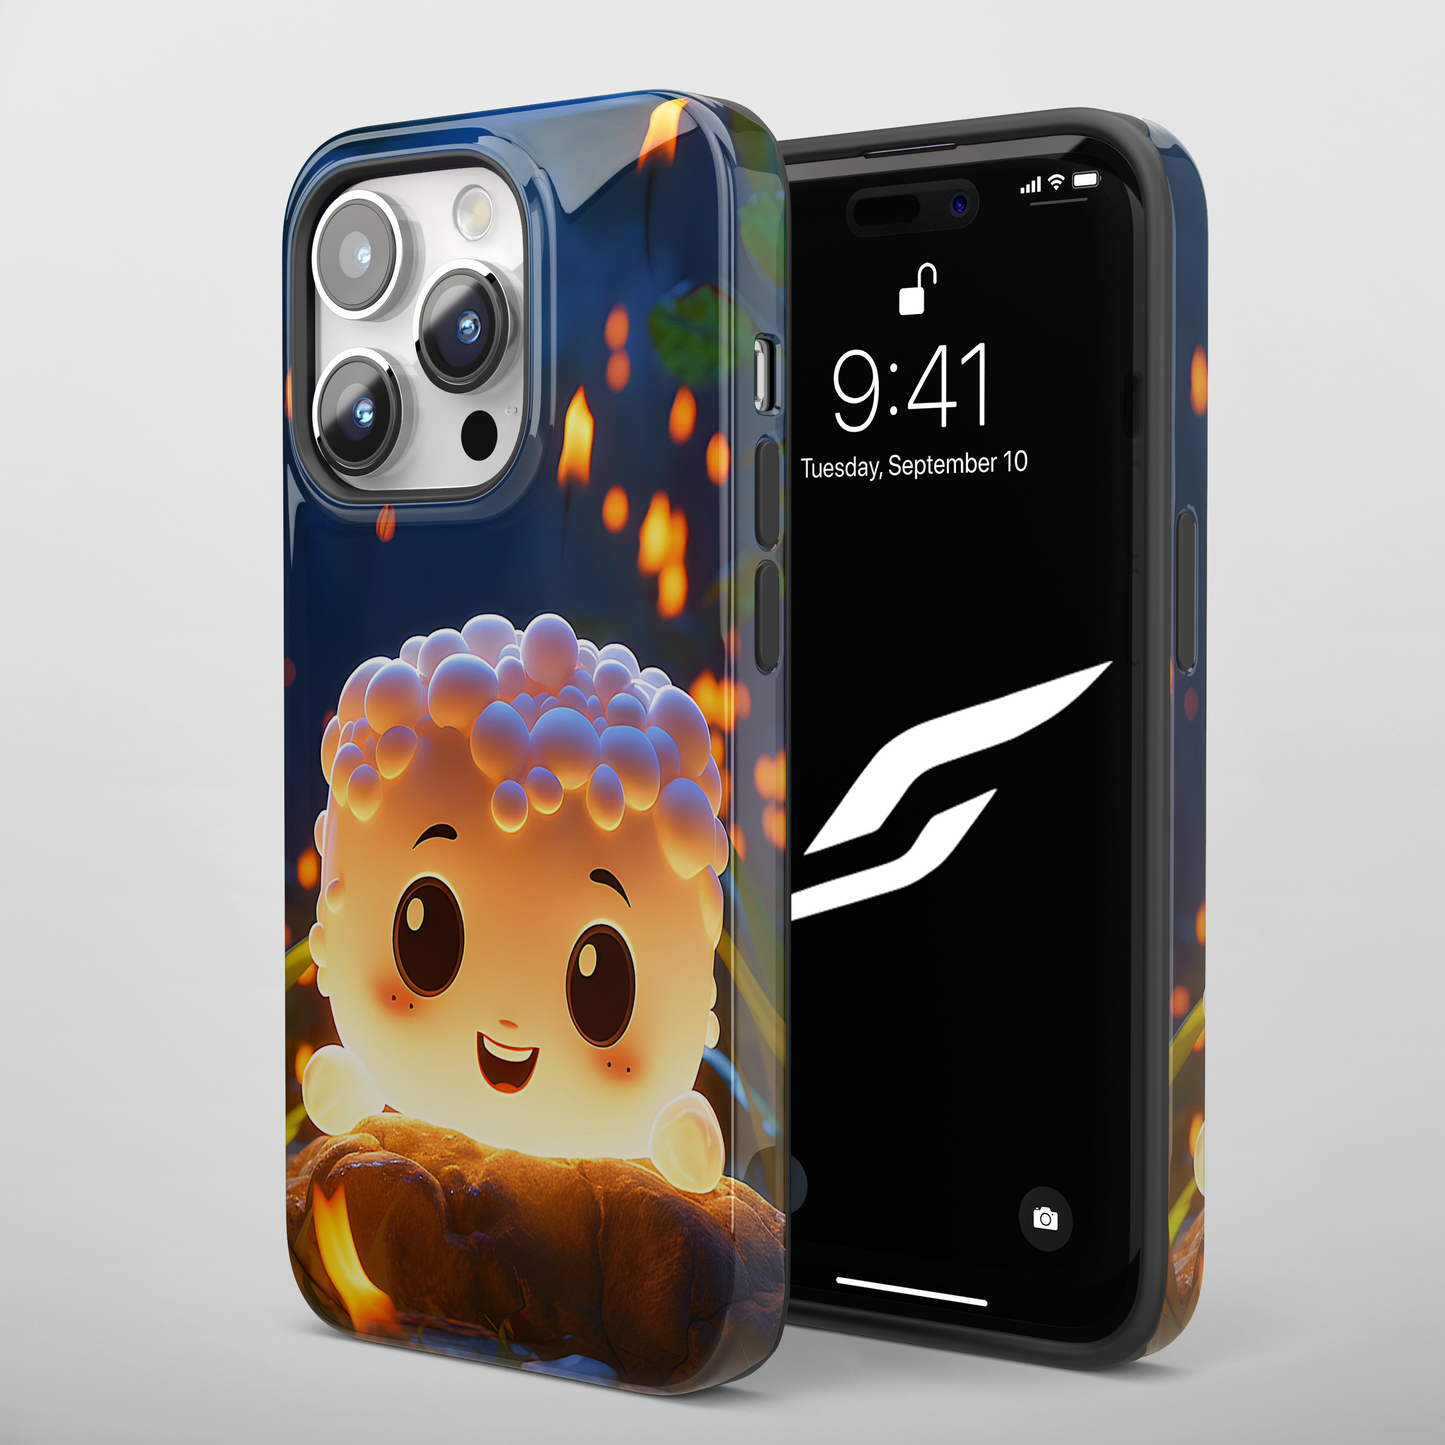 Gleeful Mallow (iPhone Case 11-15)
Gleeful Mallow
Get the ultimate protection for iPhone 11, 12, 13,14, 15 with RIMA's Tough Phone Case. Its premium materials offer shock dispersion and a sleek, glosRimaGallery